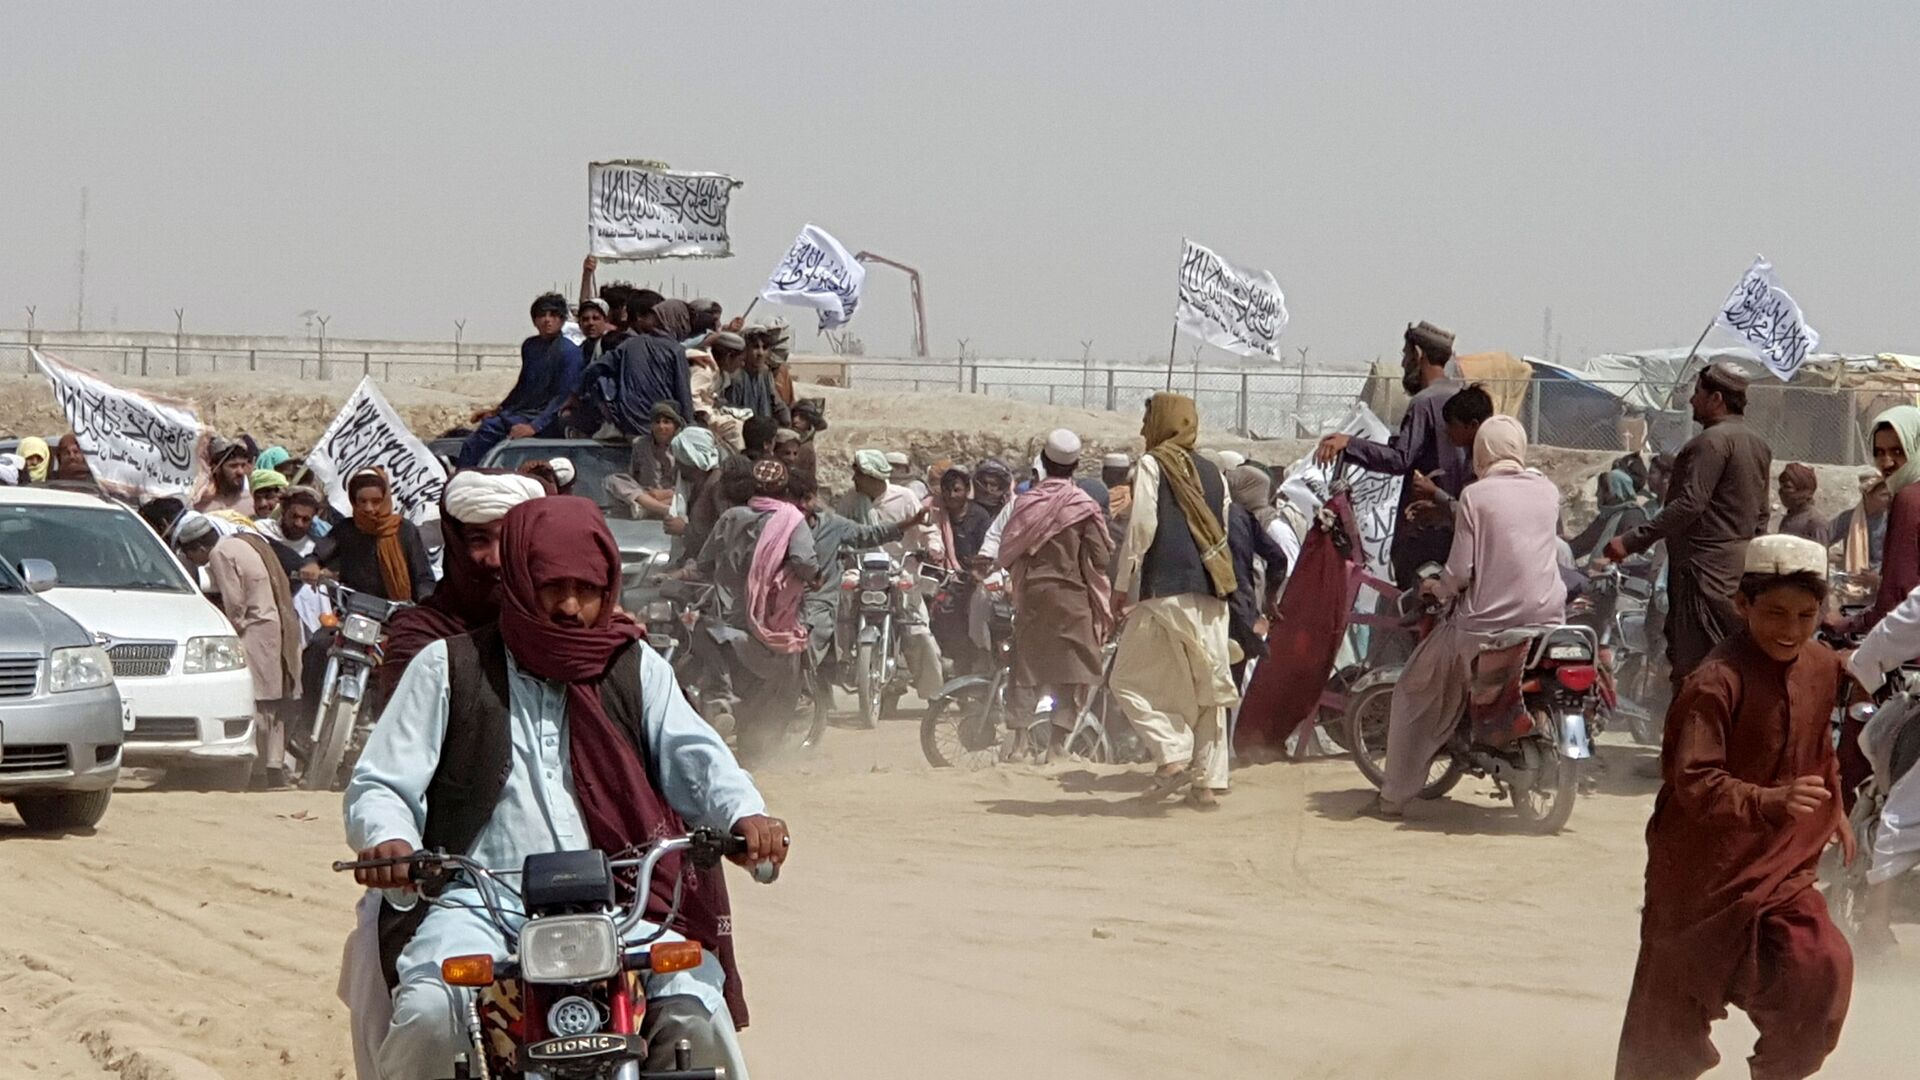 People on vehicles, holding Taliban flags, gather near the Friendship Gate crossing point in the Pakistan-Afghanistan border town of Chaman, Pakistan July 14, 2021 - Sputnik International, 1920, 29.07.2021